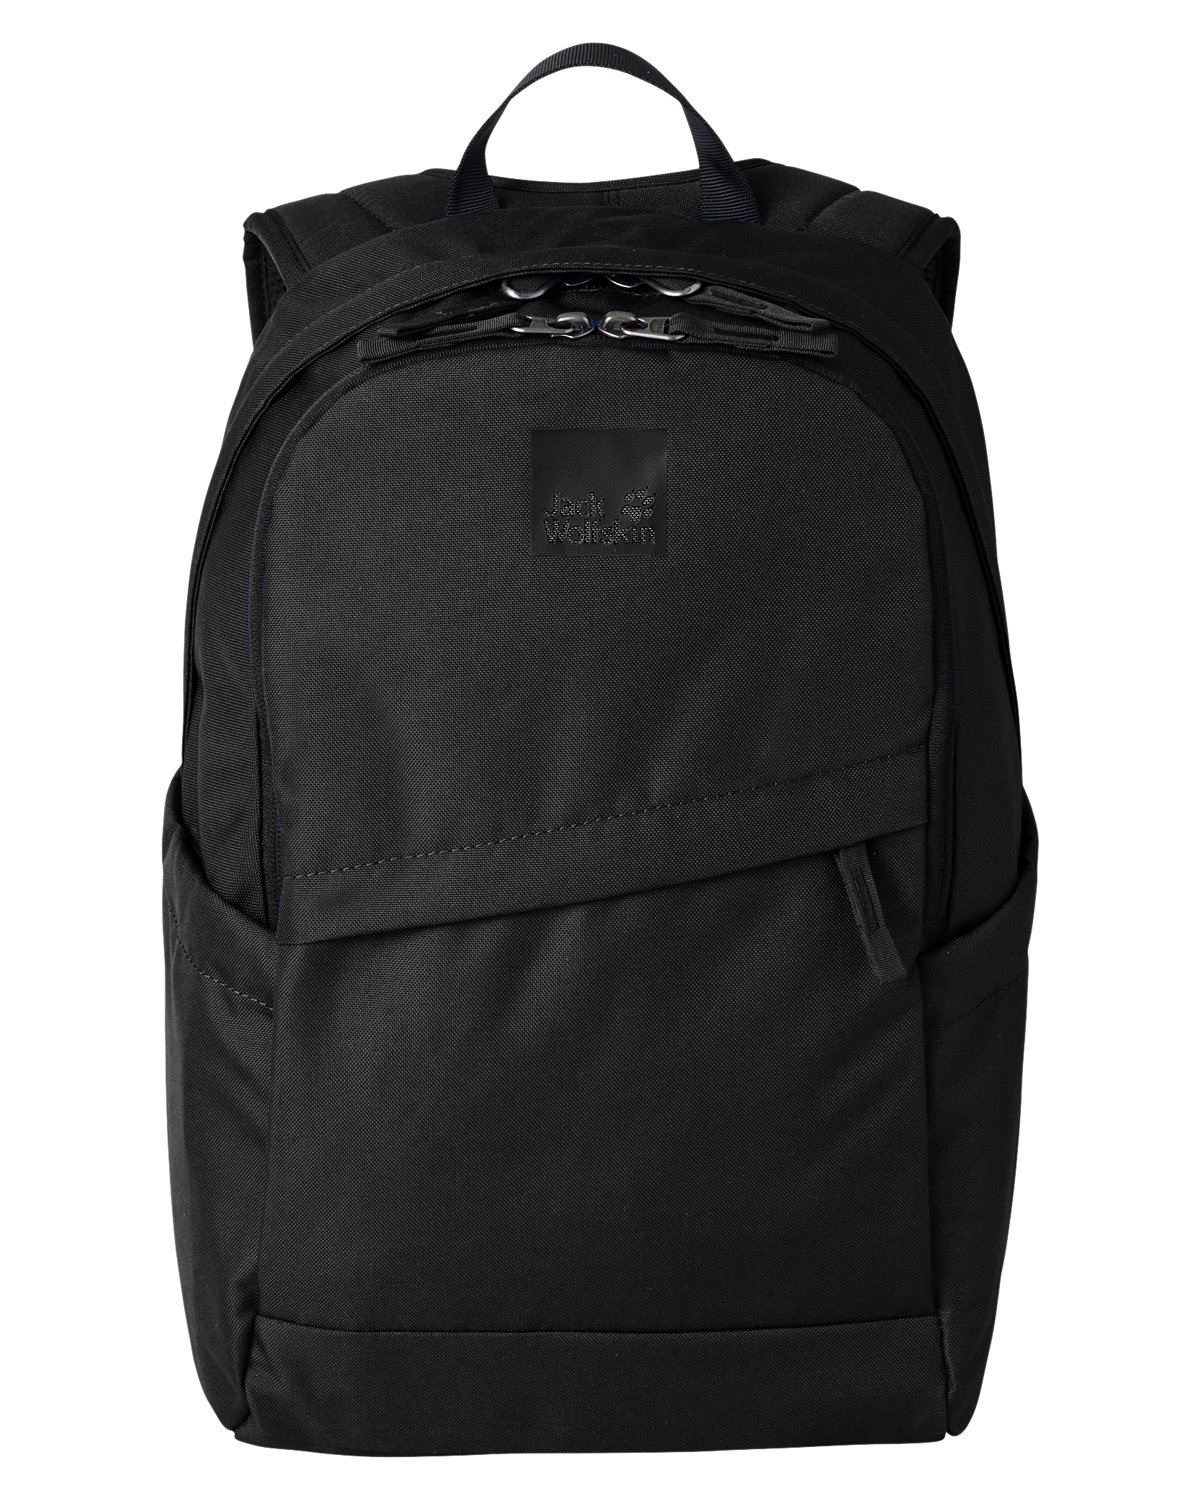 Perfect Day Backpack-